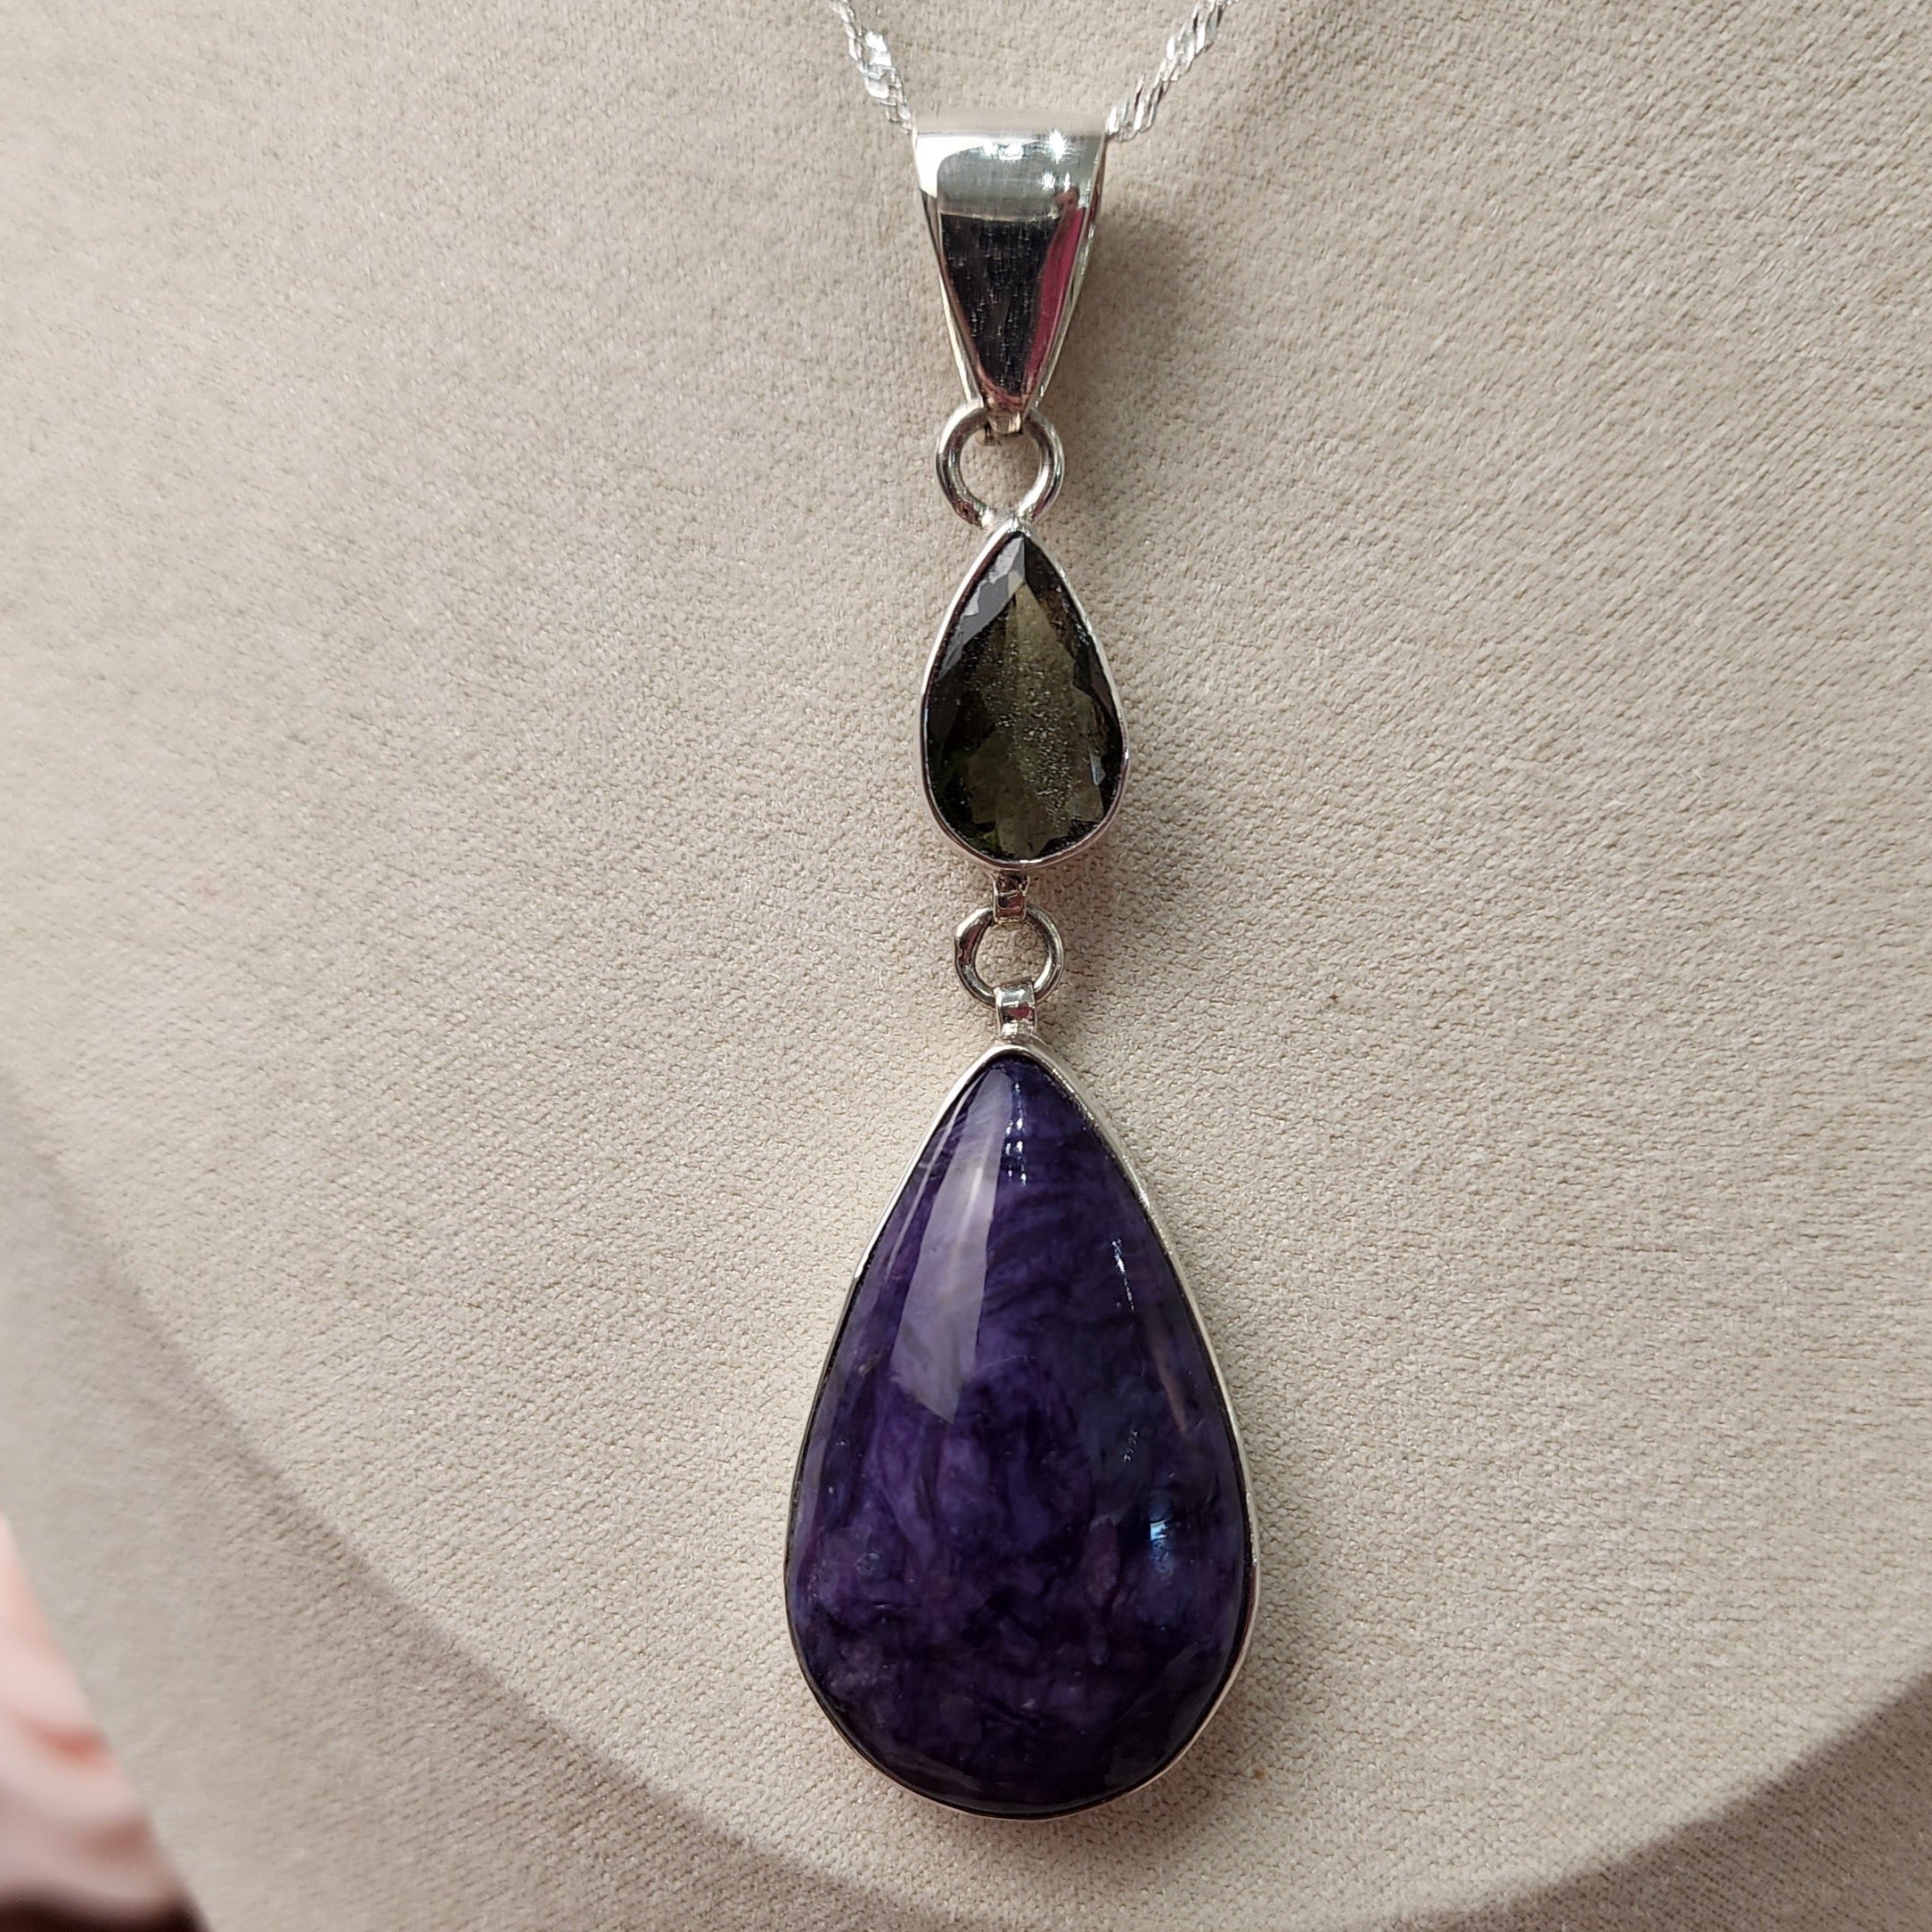 Moldavite and Charoite Necklace .925 Silver for Transforming into your Dream Life